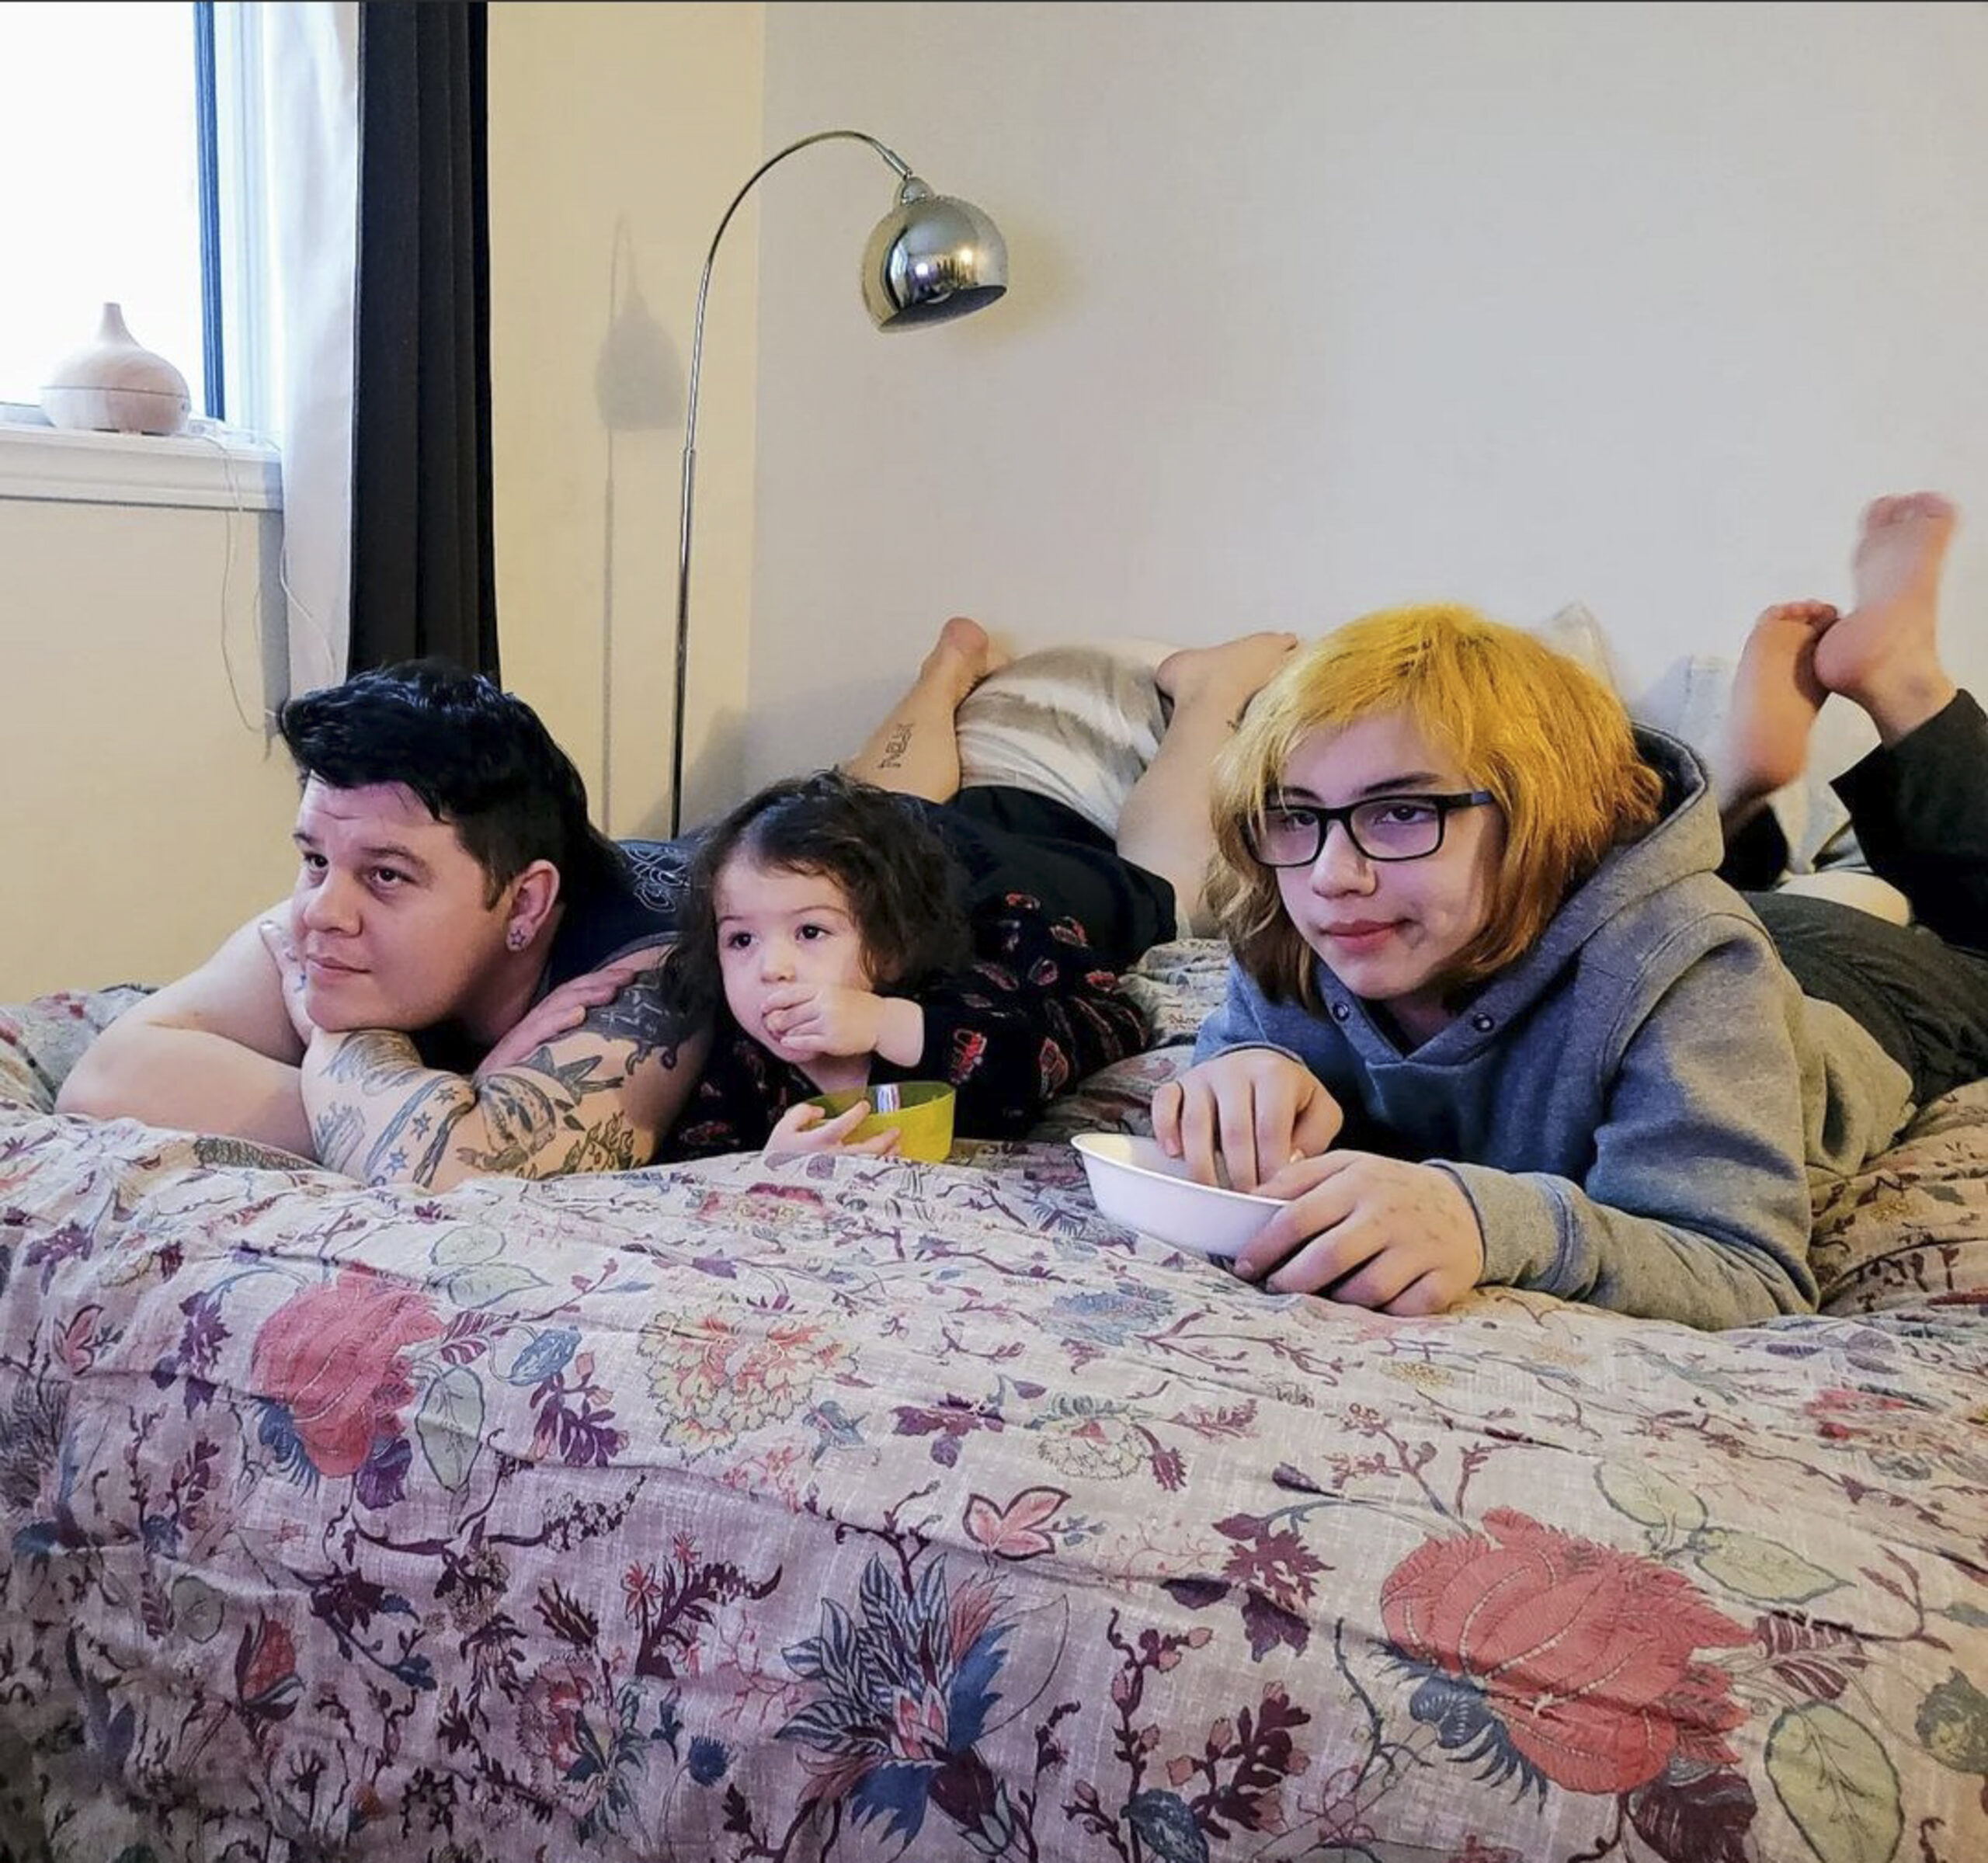 Stefan Richard, his children Rainbow & Arizona watching a movie together in a row of three on the bed.